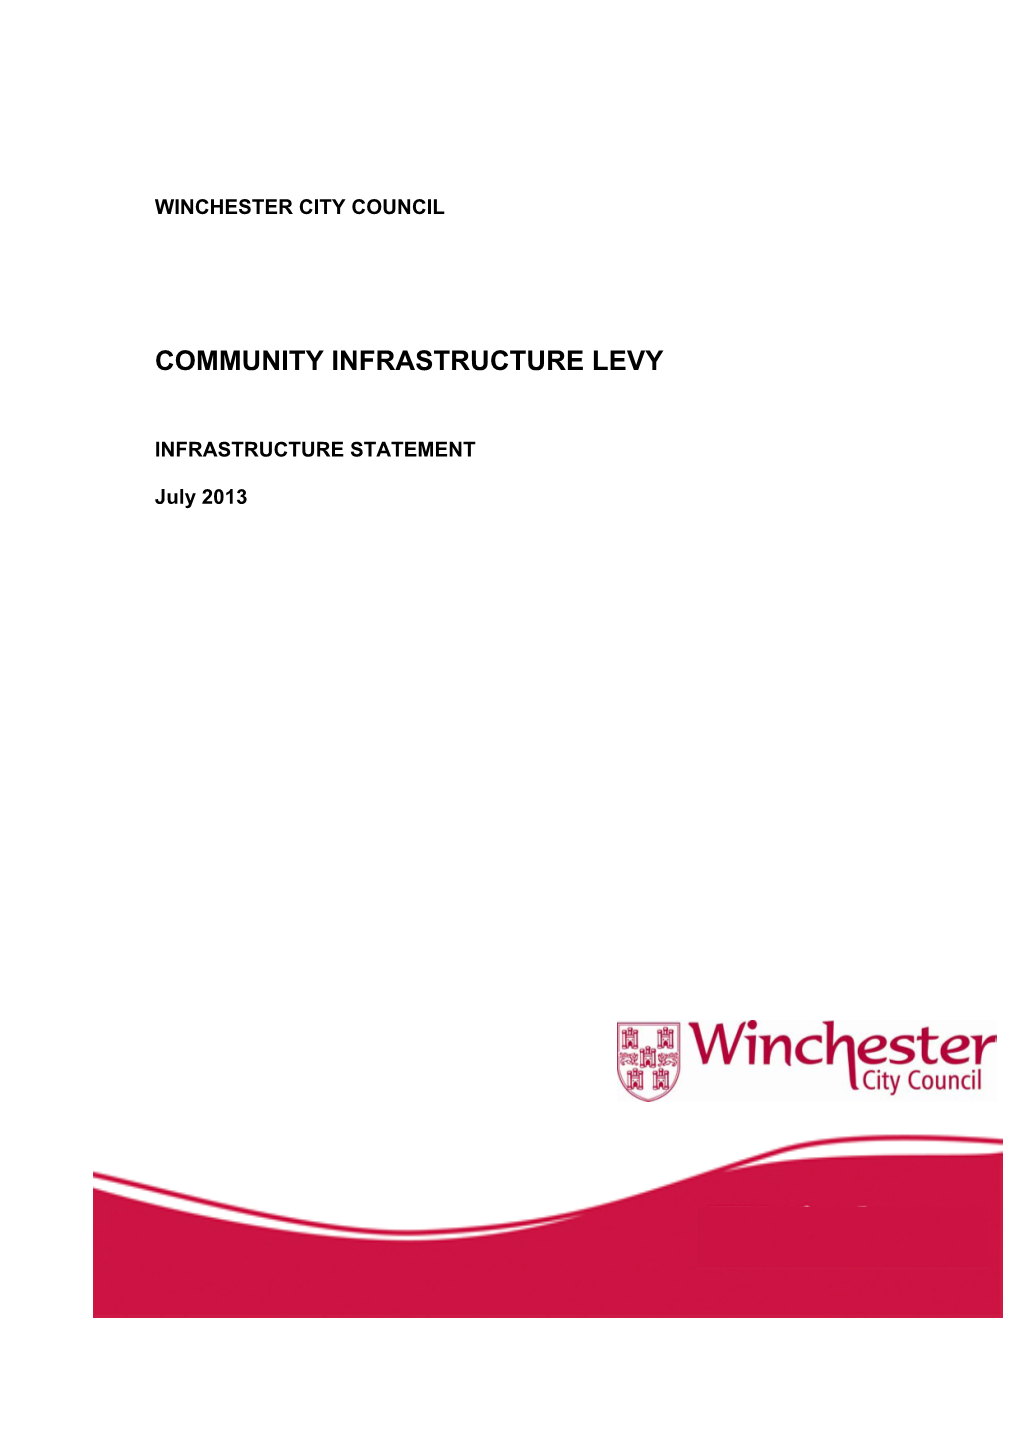 Community Infrastructure Levy